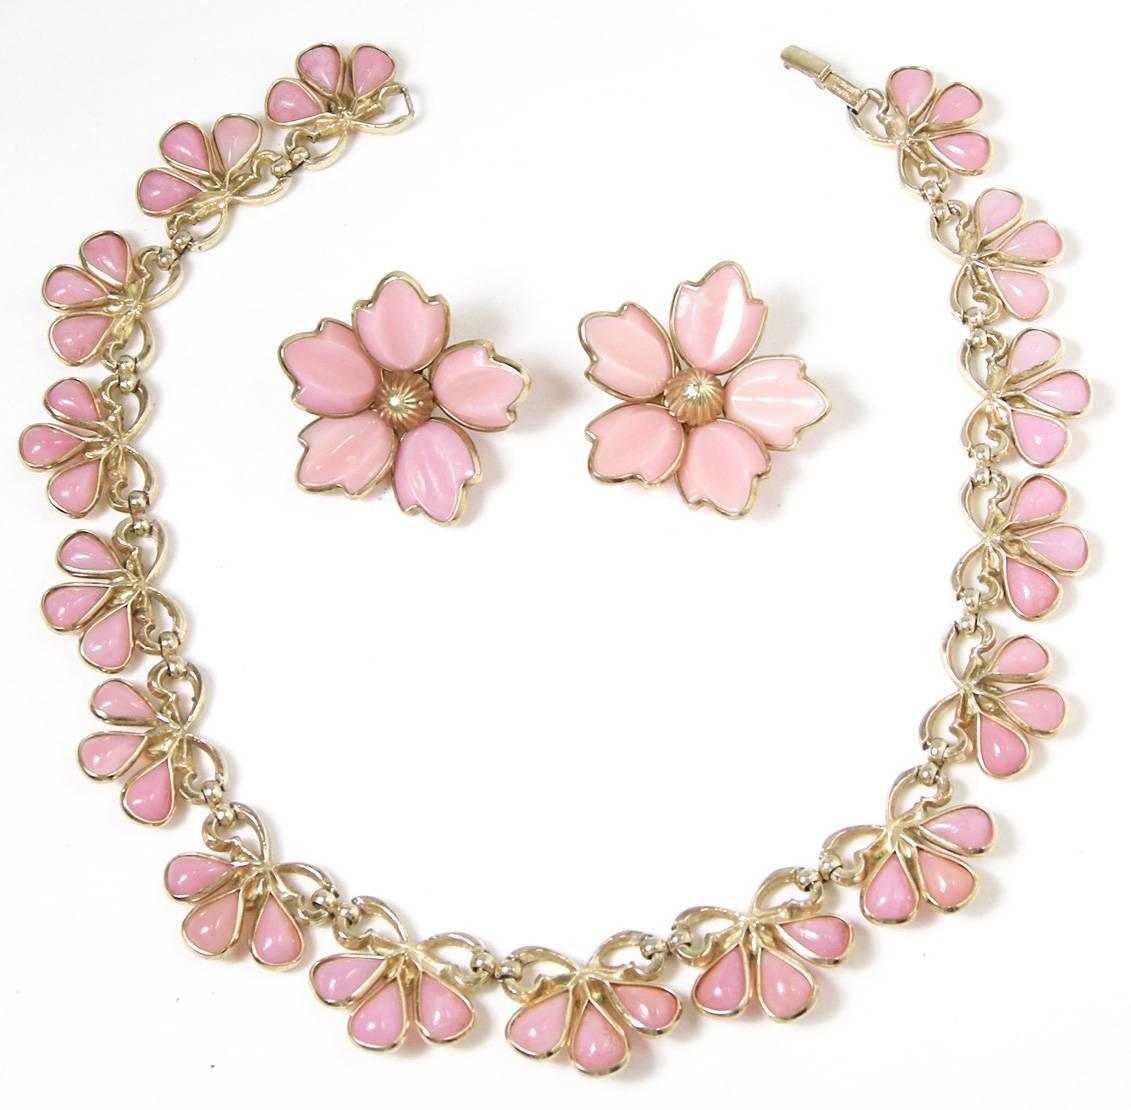 Once in a while you find something special like this 1940s Trifari pink poured glass floral necklace set.  Each piece is moulded glass creating a floral necklace and matching clip-back earrings.  It’s in a gold tone setting.  The necklace is 15-1/2”